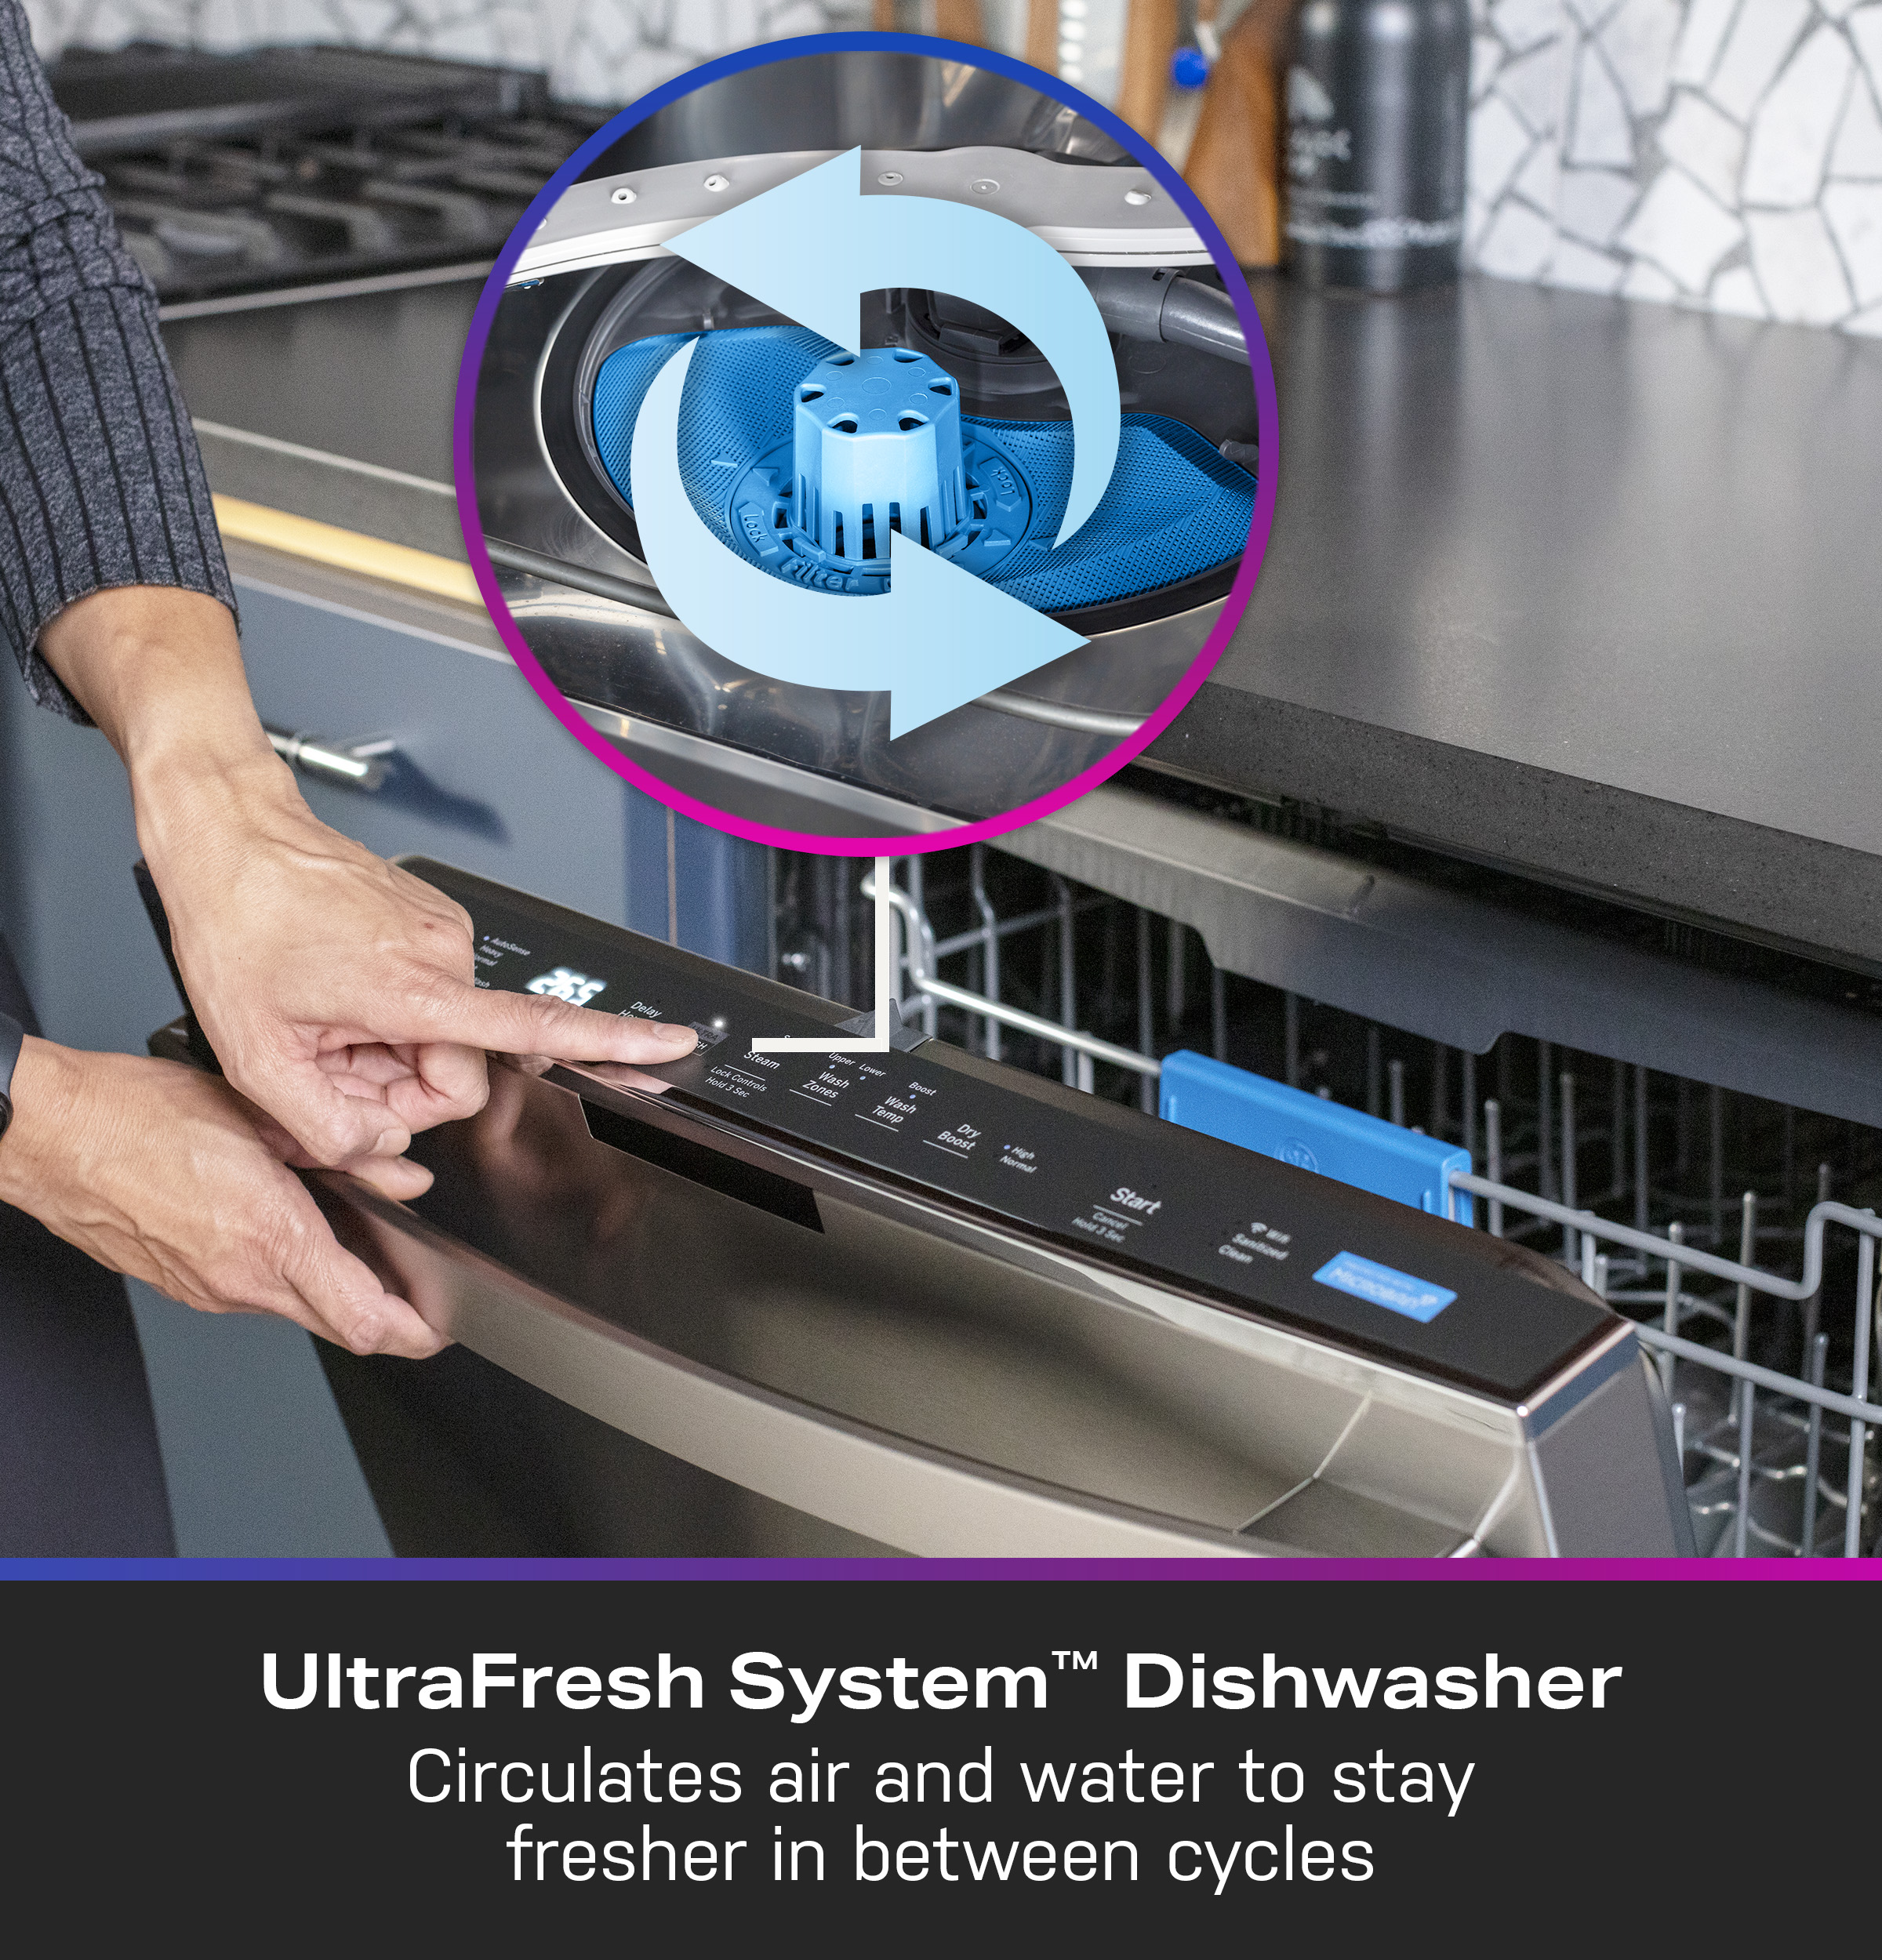 Buy GE Built-In Potscrubber Dishwasher with SureClean Wash System, 2 Wash  Levels, 5 Cycles/8 Options and Standard Sound Insulation Package